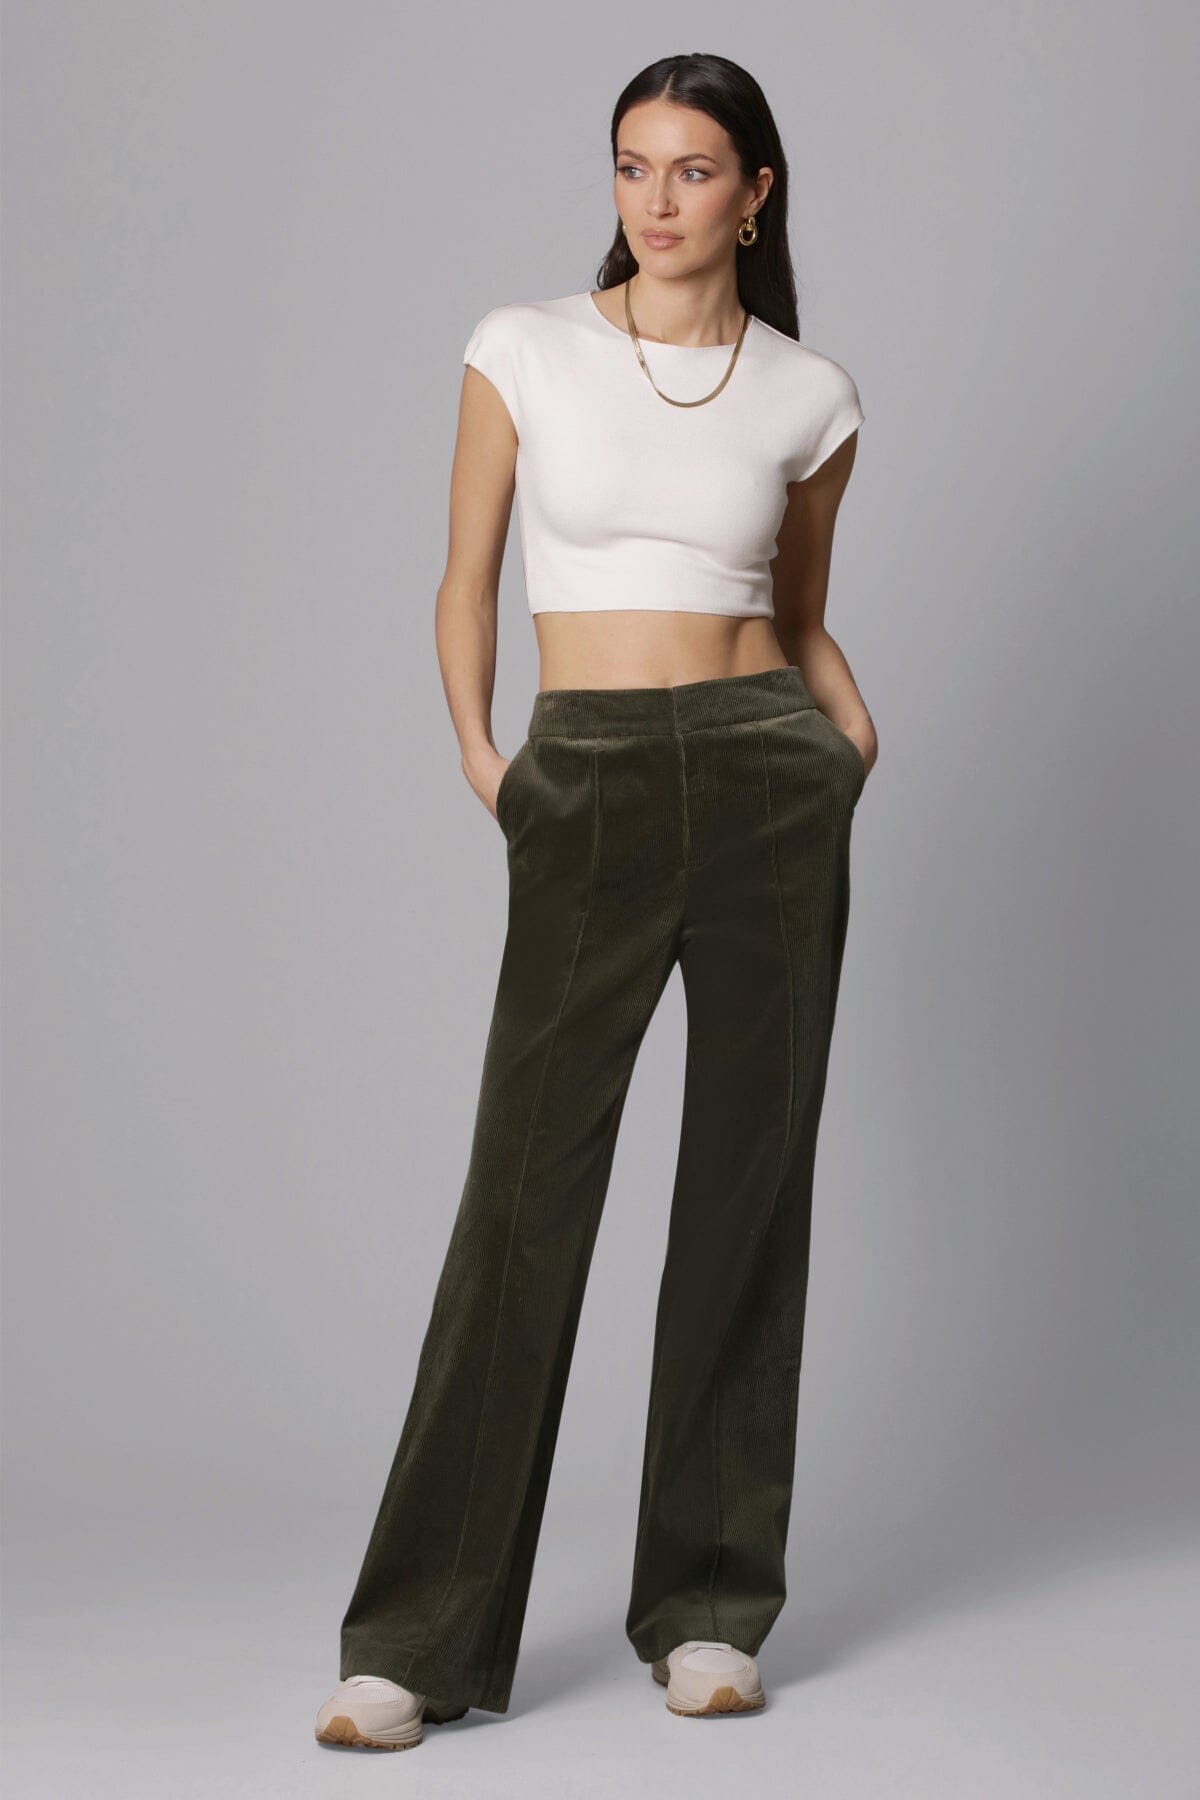 Ladies Pants For Kurtis With Side Pocket Stretchable Trousers